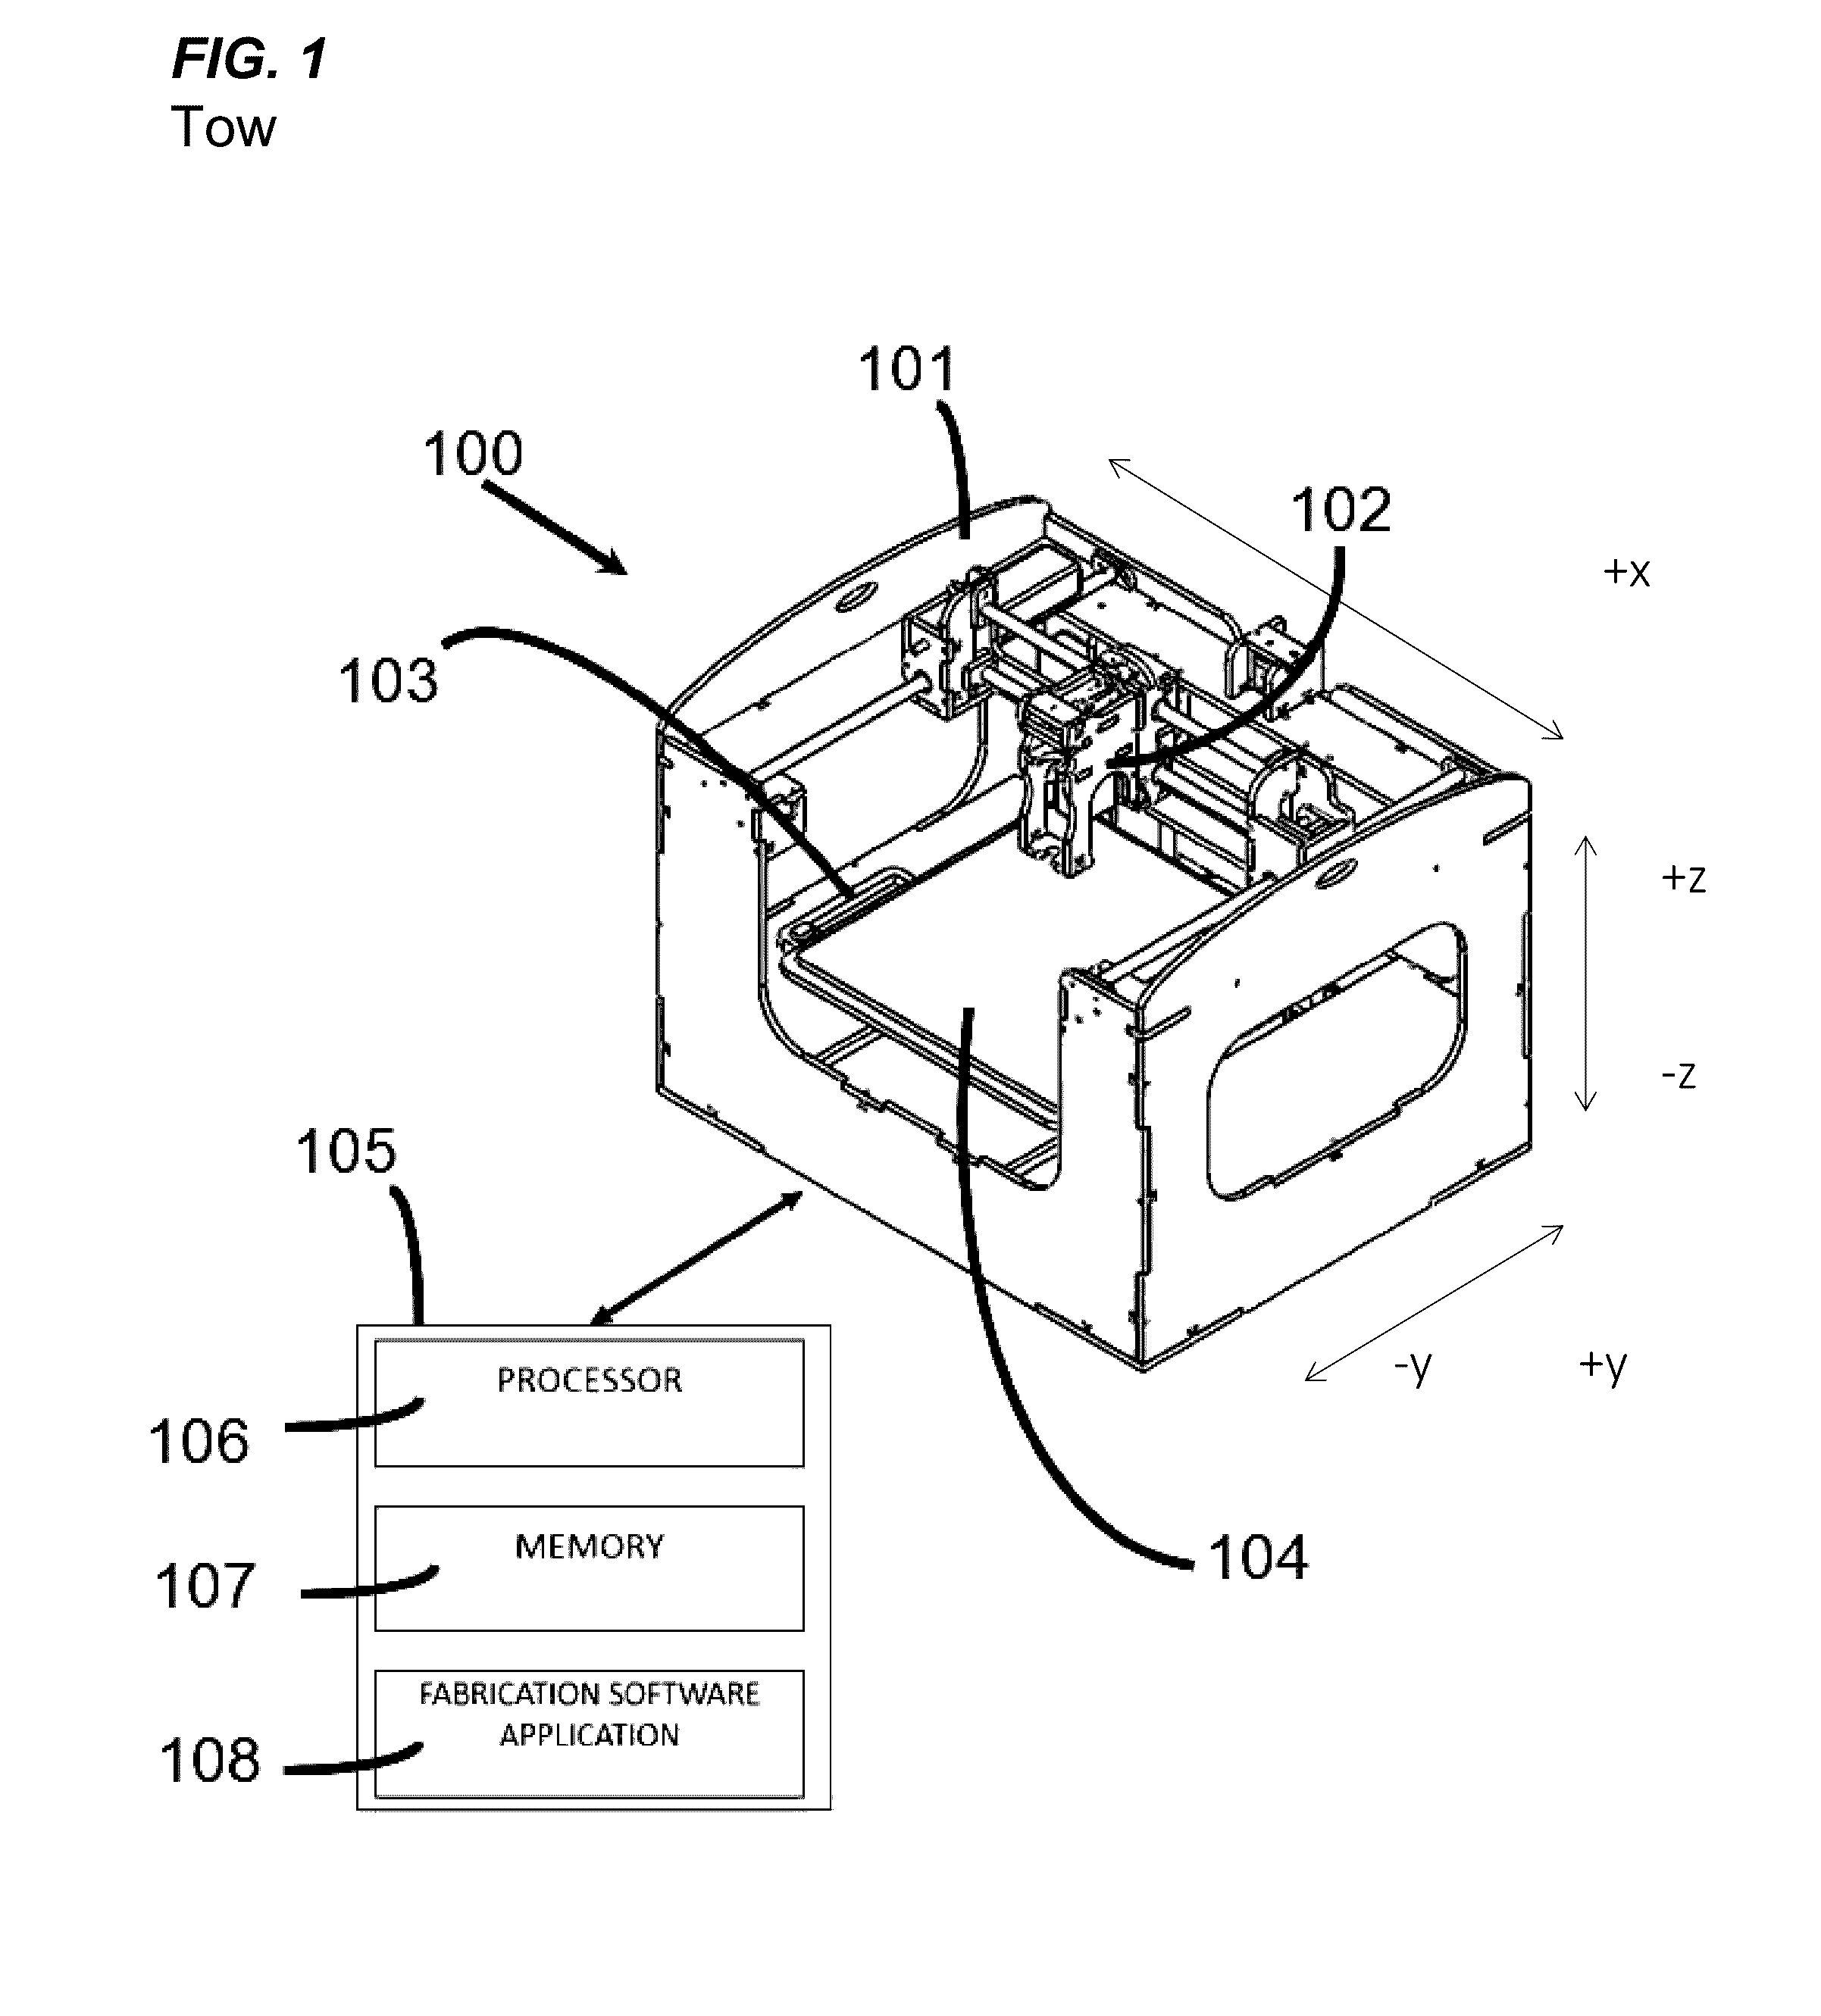 Systems and Methods for Manufacturing of Multi-Property Anatomically Customized Devices